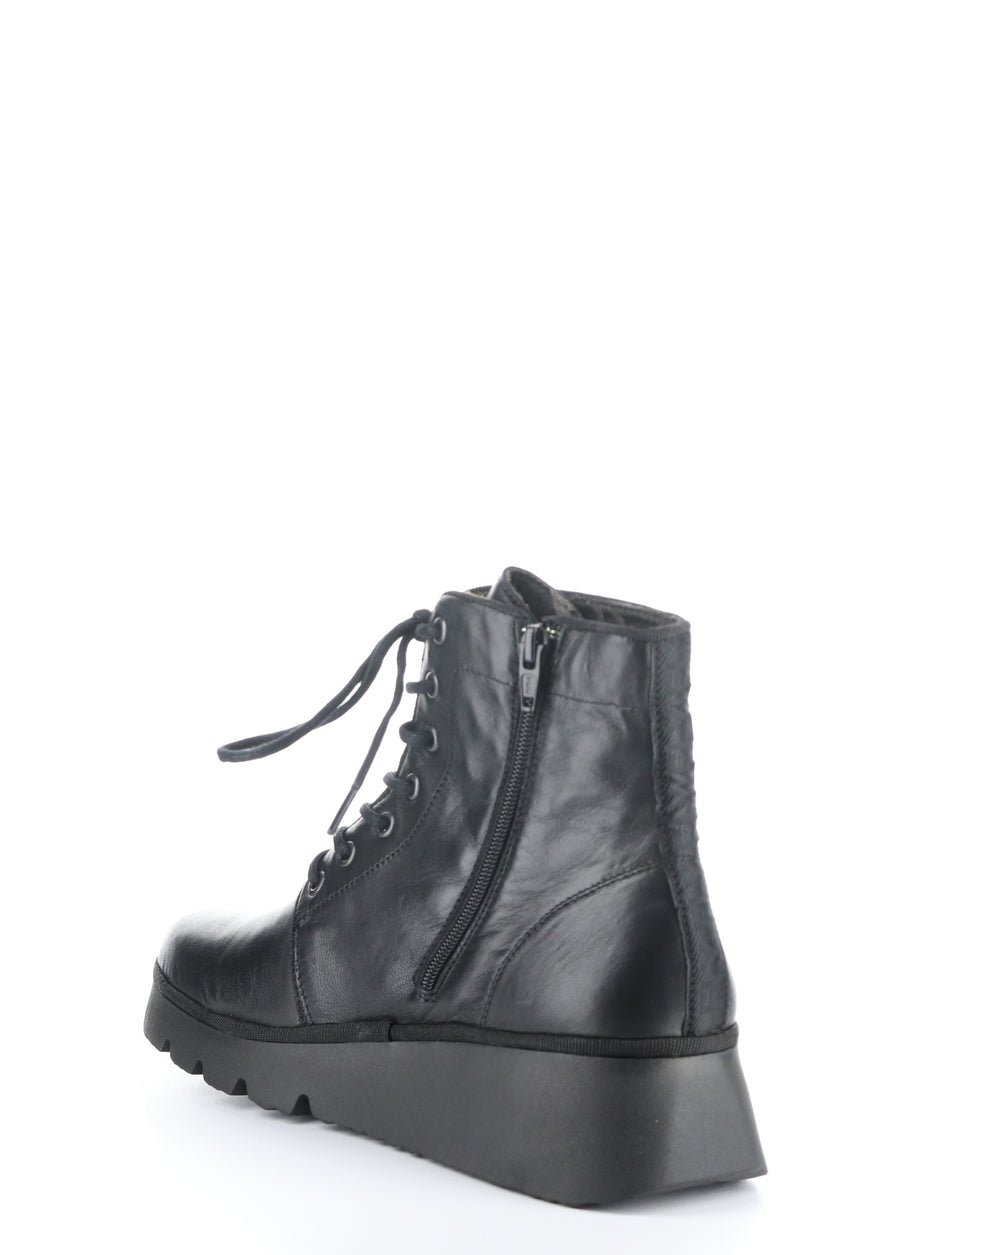 PALL404FLY 000 BLACK Lace-up Boots